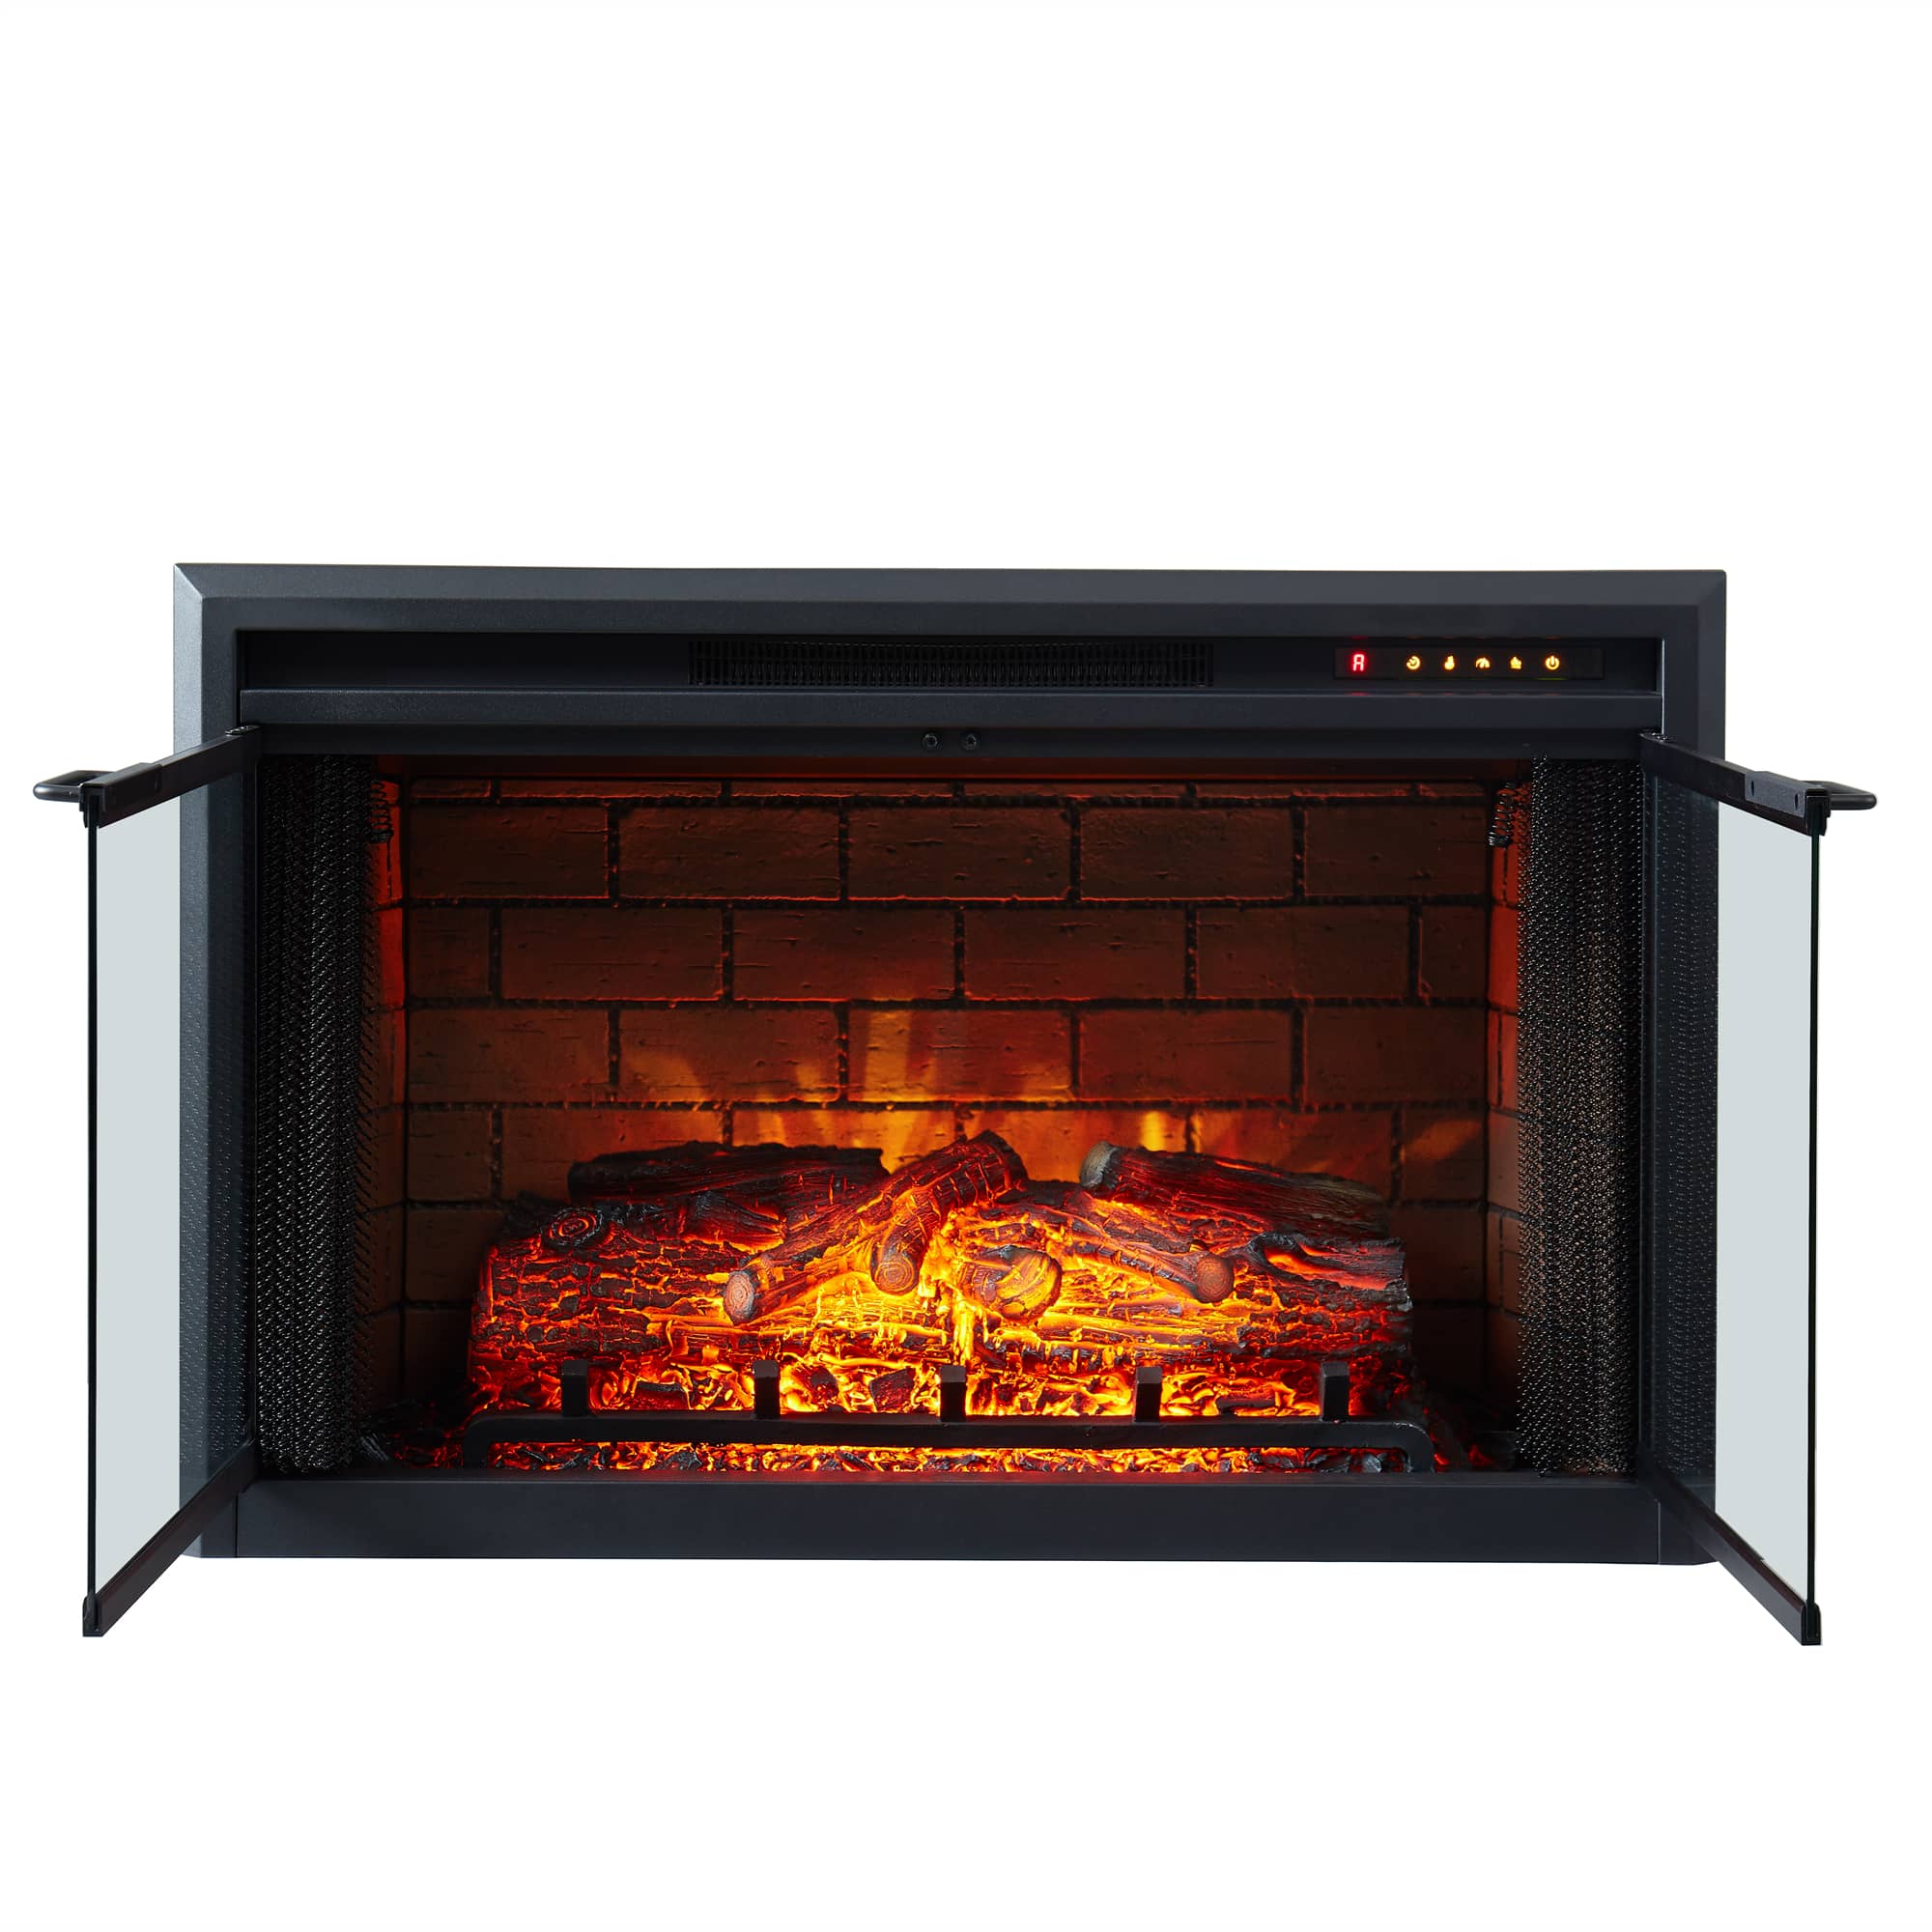 CASAINC 35 in. Built-in Ventless Electric Fireplace Insert with Glass Door and Mesh Screen